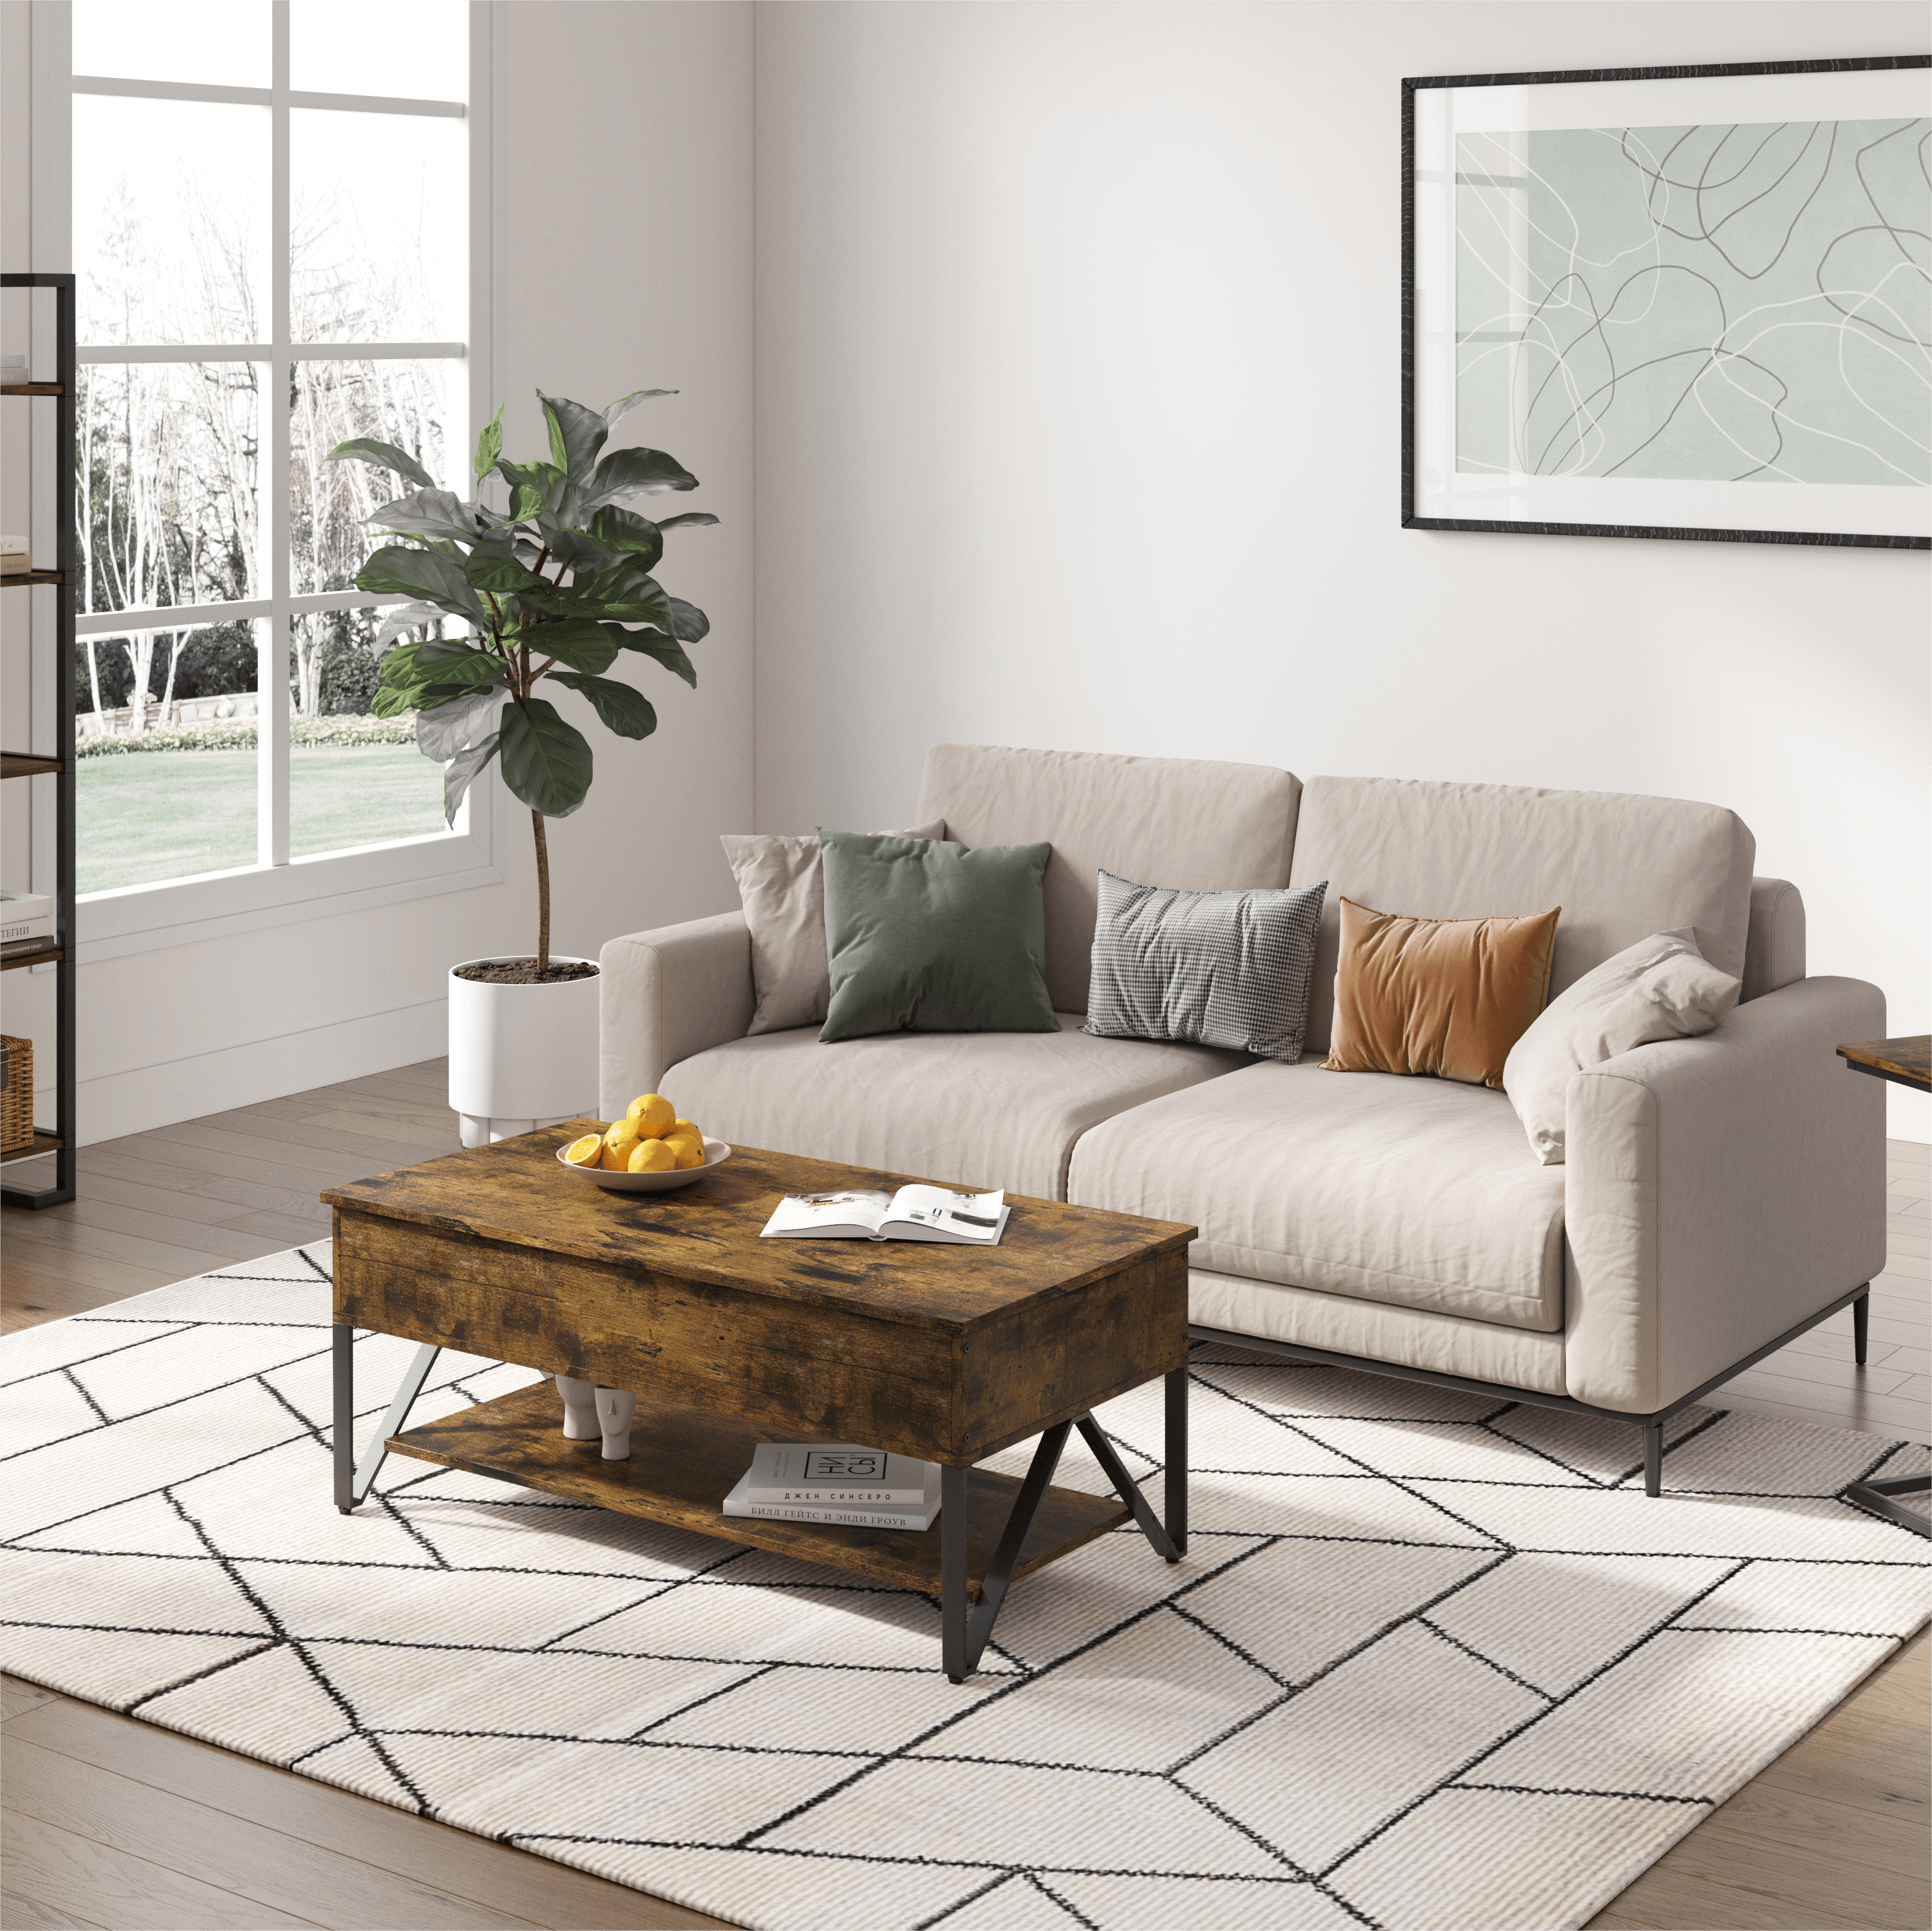 How to Choose a Coffee Table